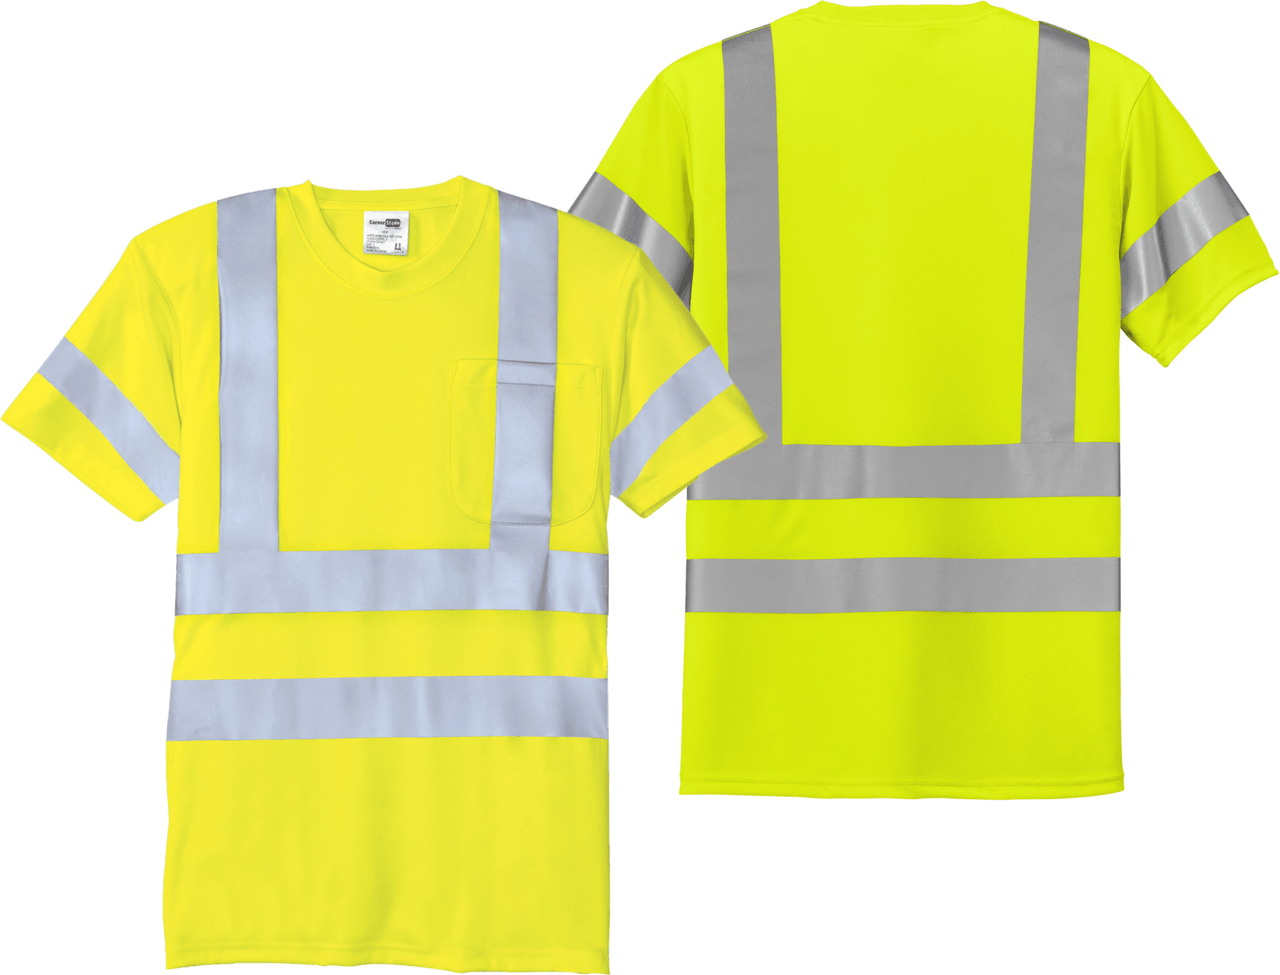 Safety Yellow Class 3 T-Shirt with Pocket
ANSI/SEA 107 Class 3 Certified